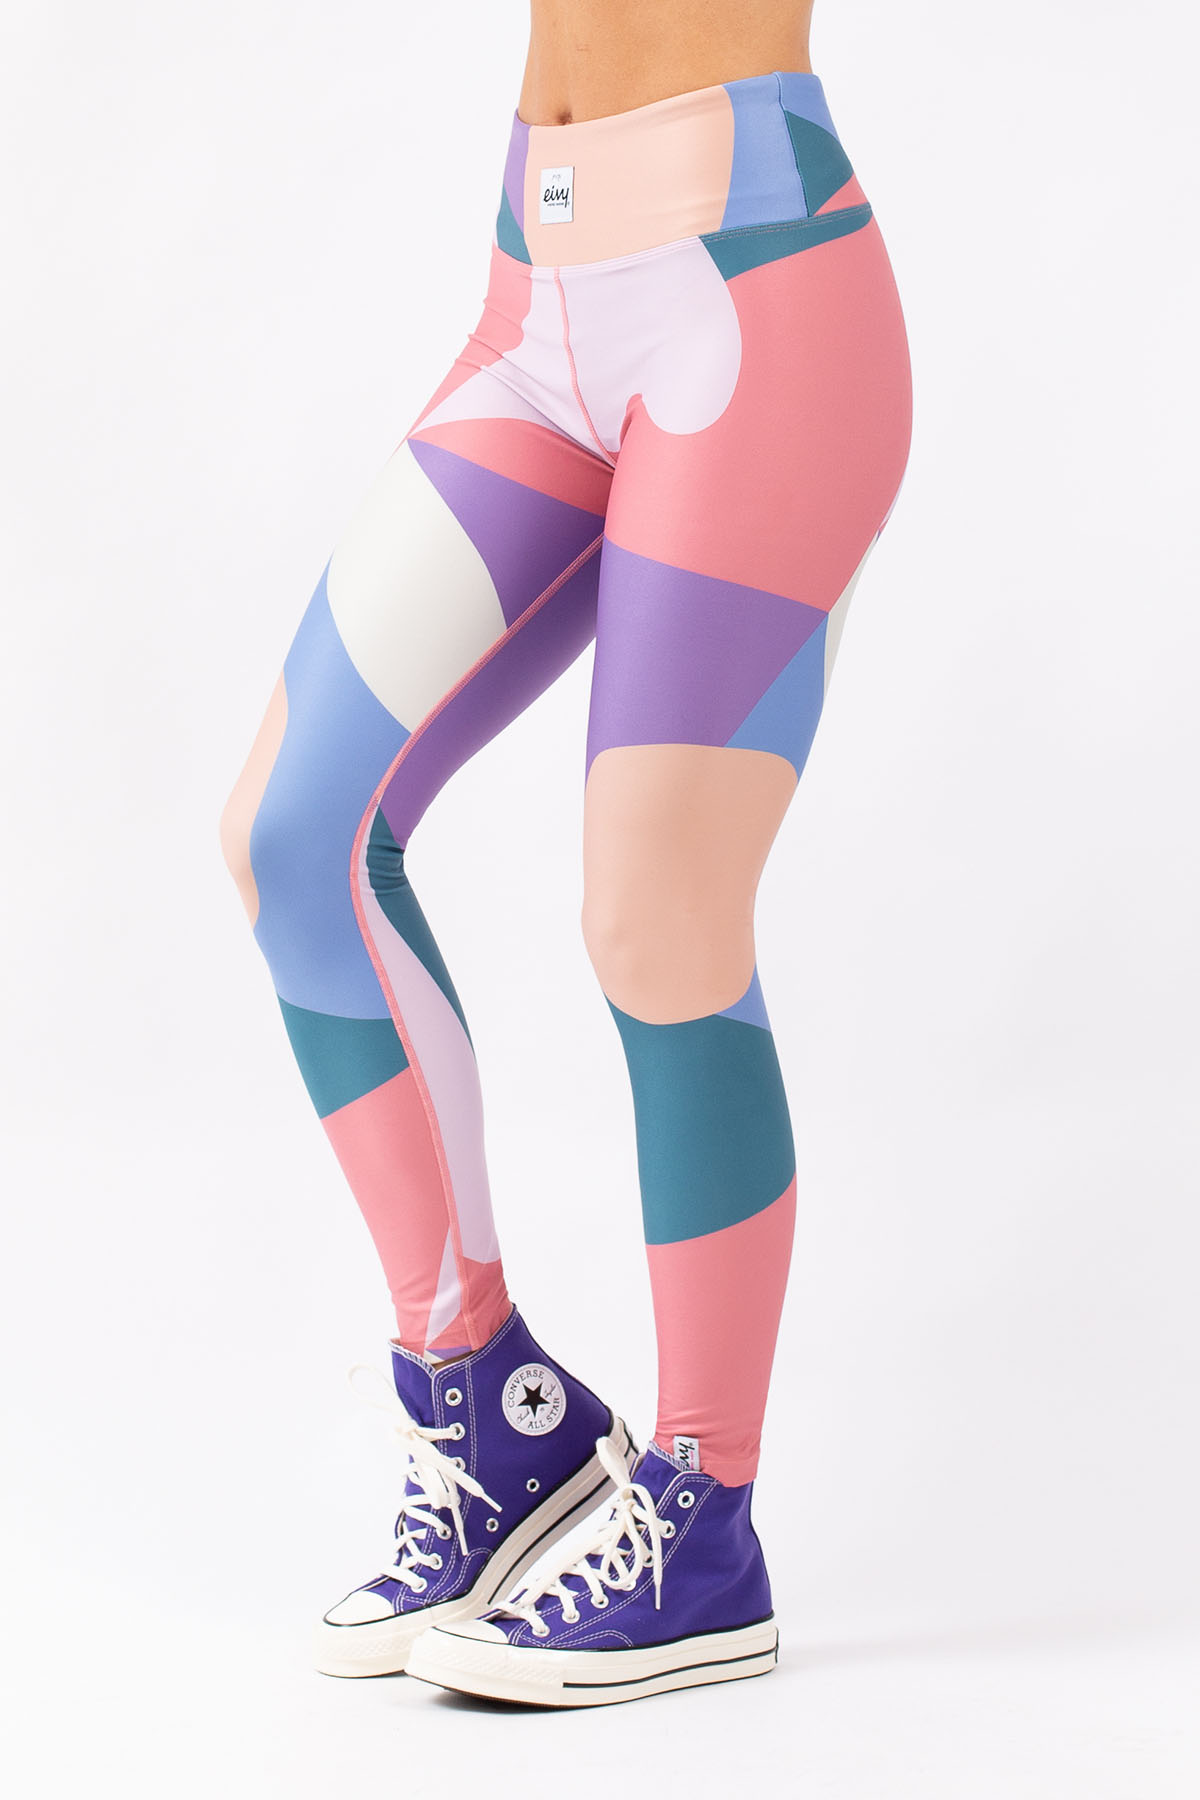 Icecold Tights - Abstract Shapes